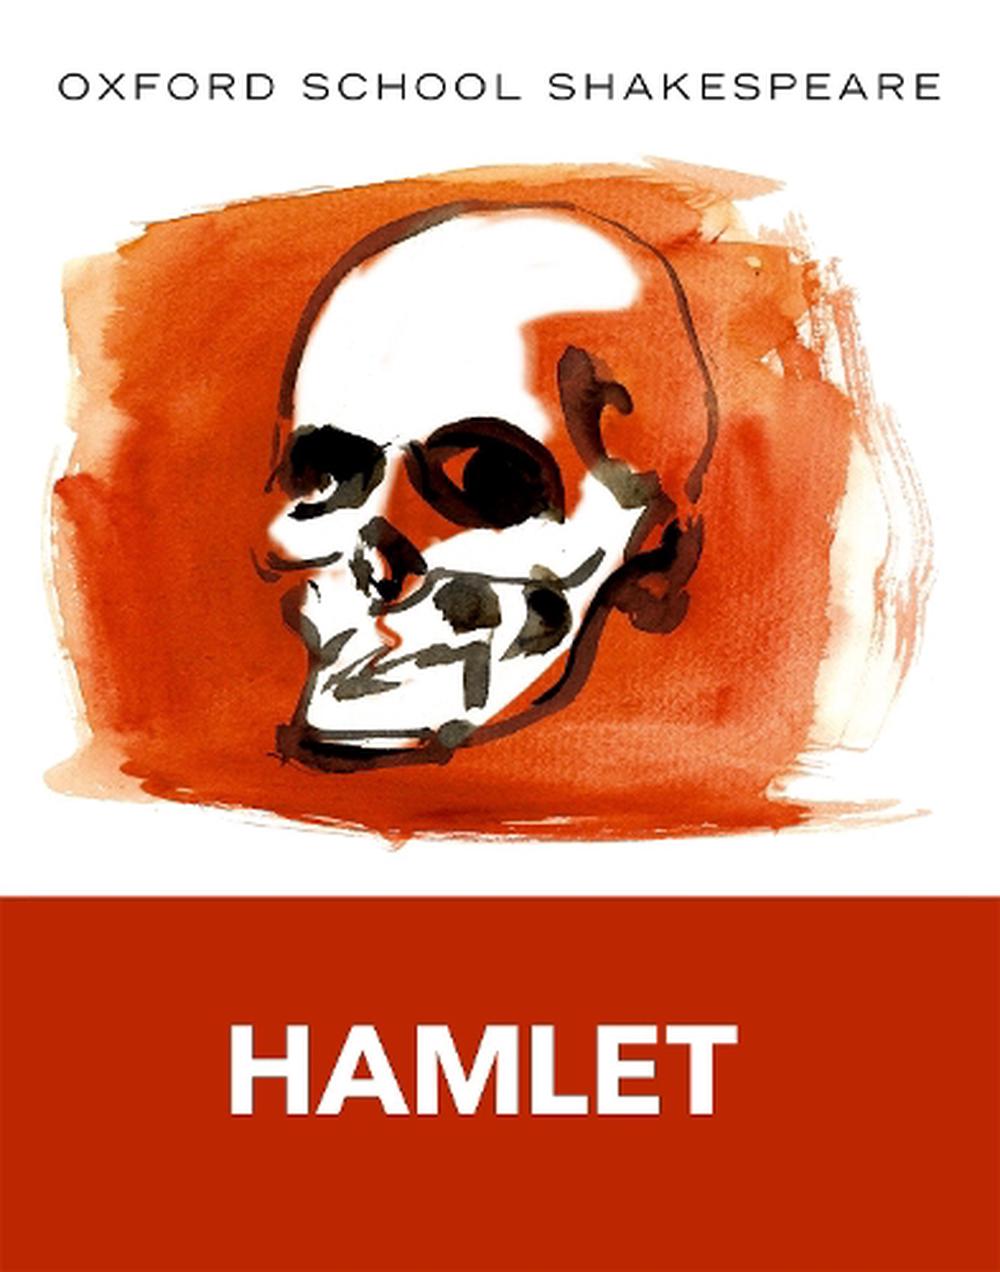 book review hamlet by william shakespeare